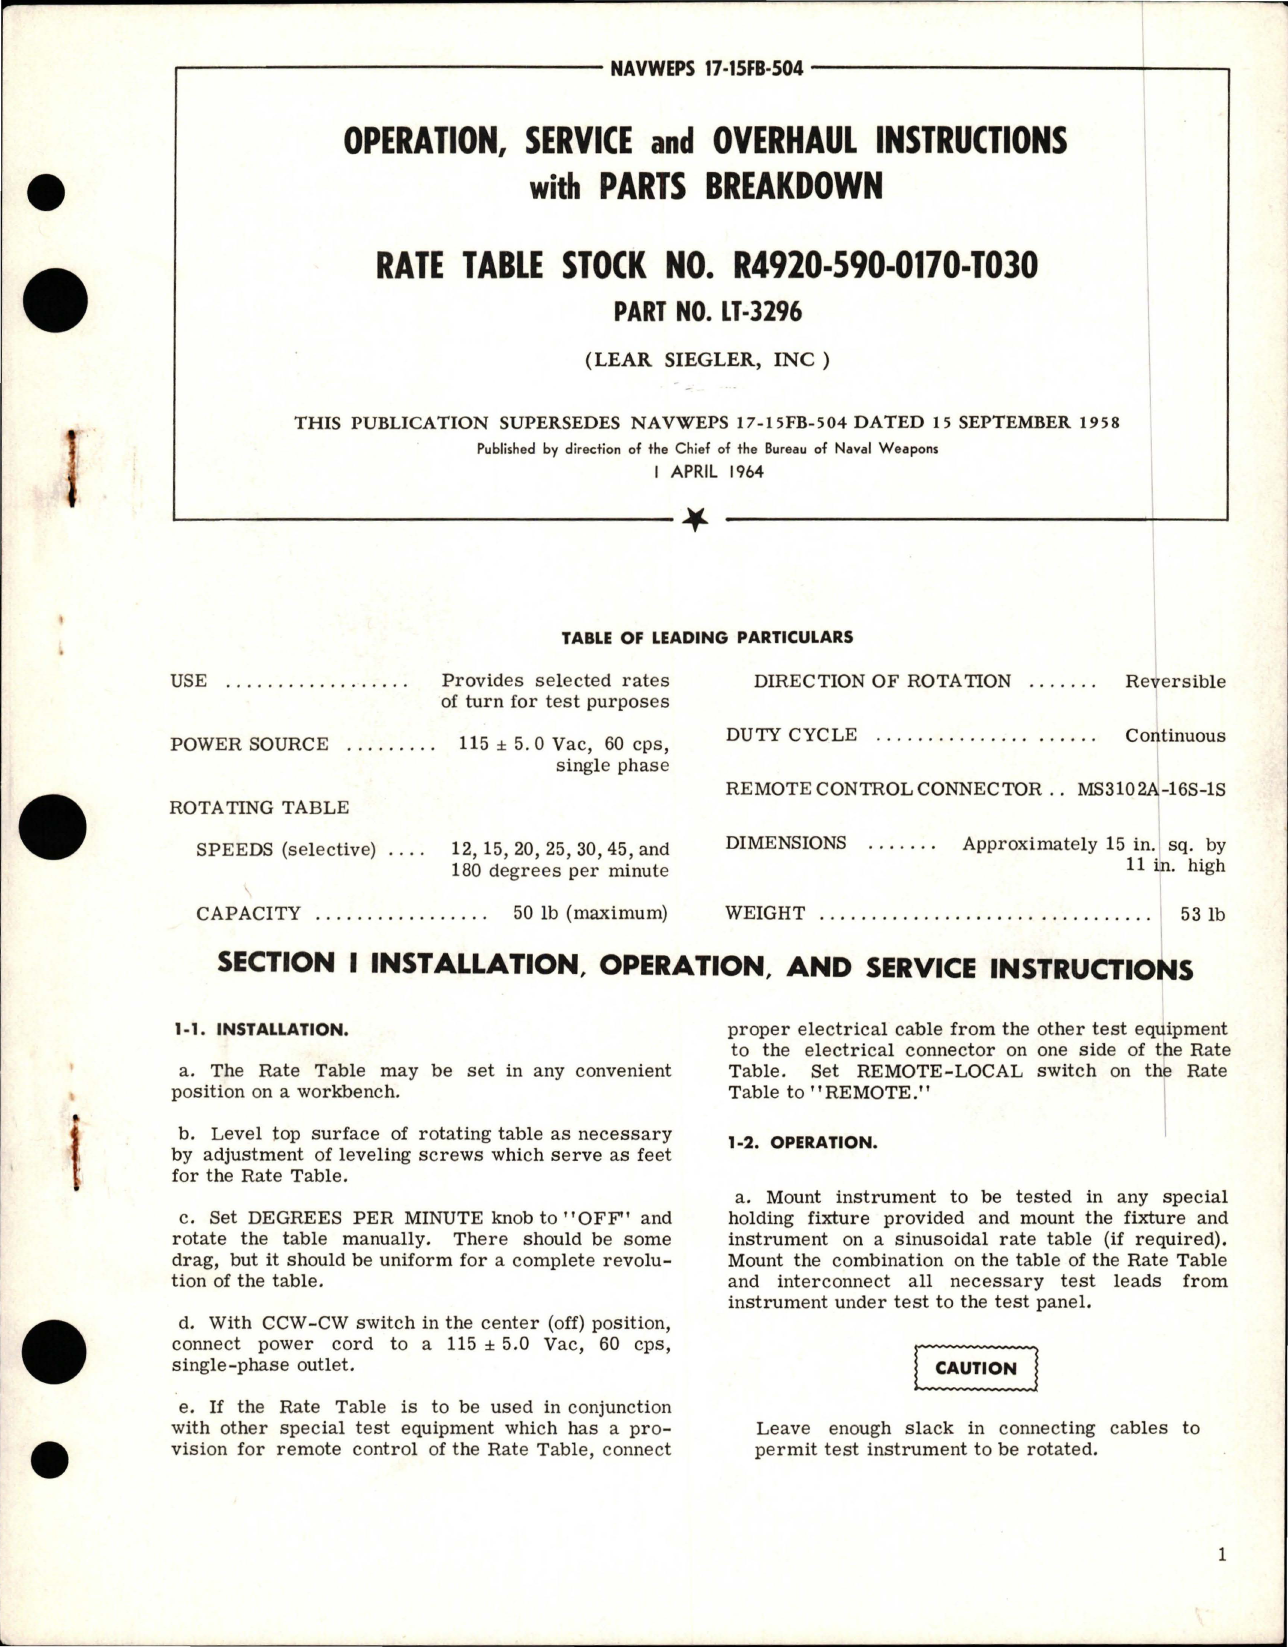 Sample page 1 from AirCorps Library document: Operation, Service and Overhaul Instructions with Parts Breakdown for Rate Table Stock R4920-590-0170-TO30 - Part LT-3296 